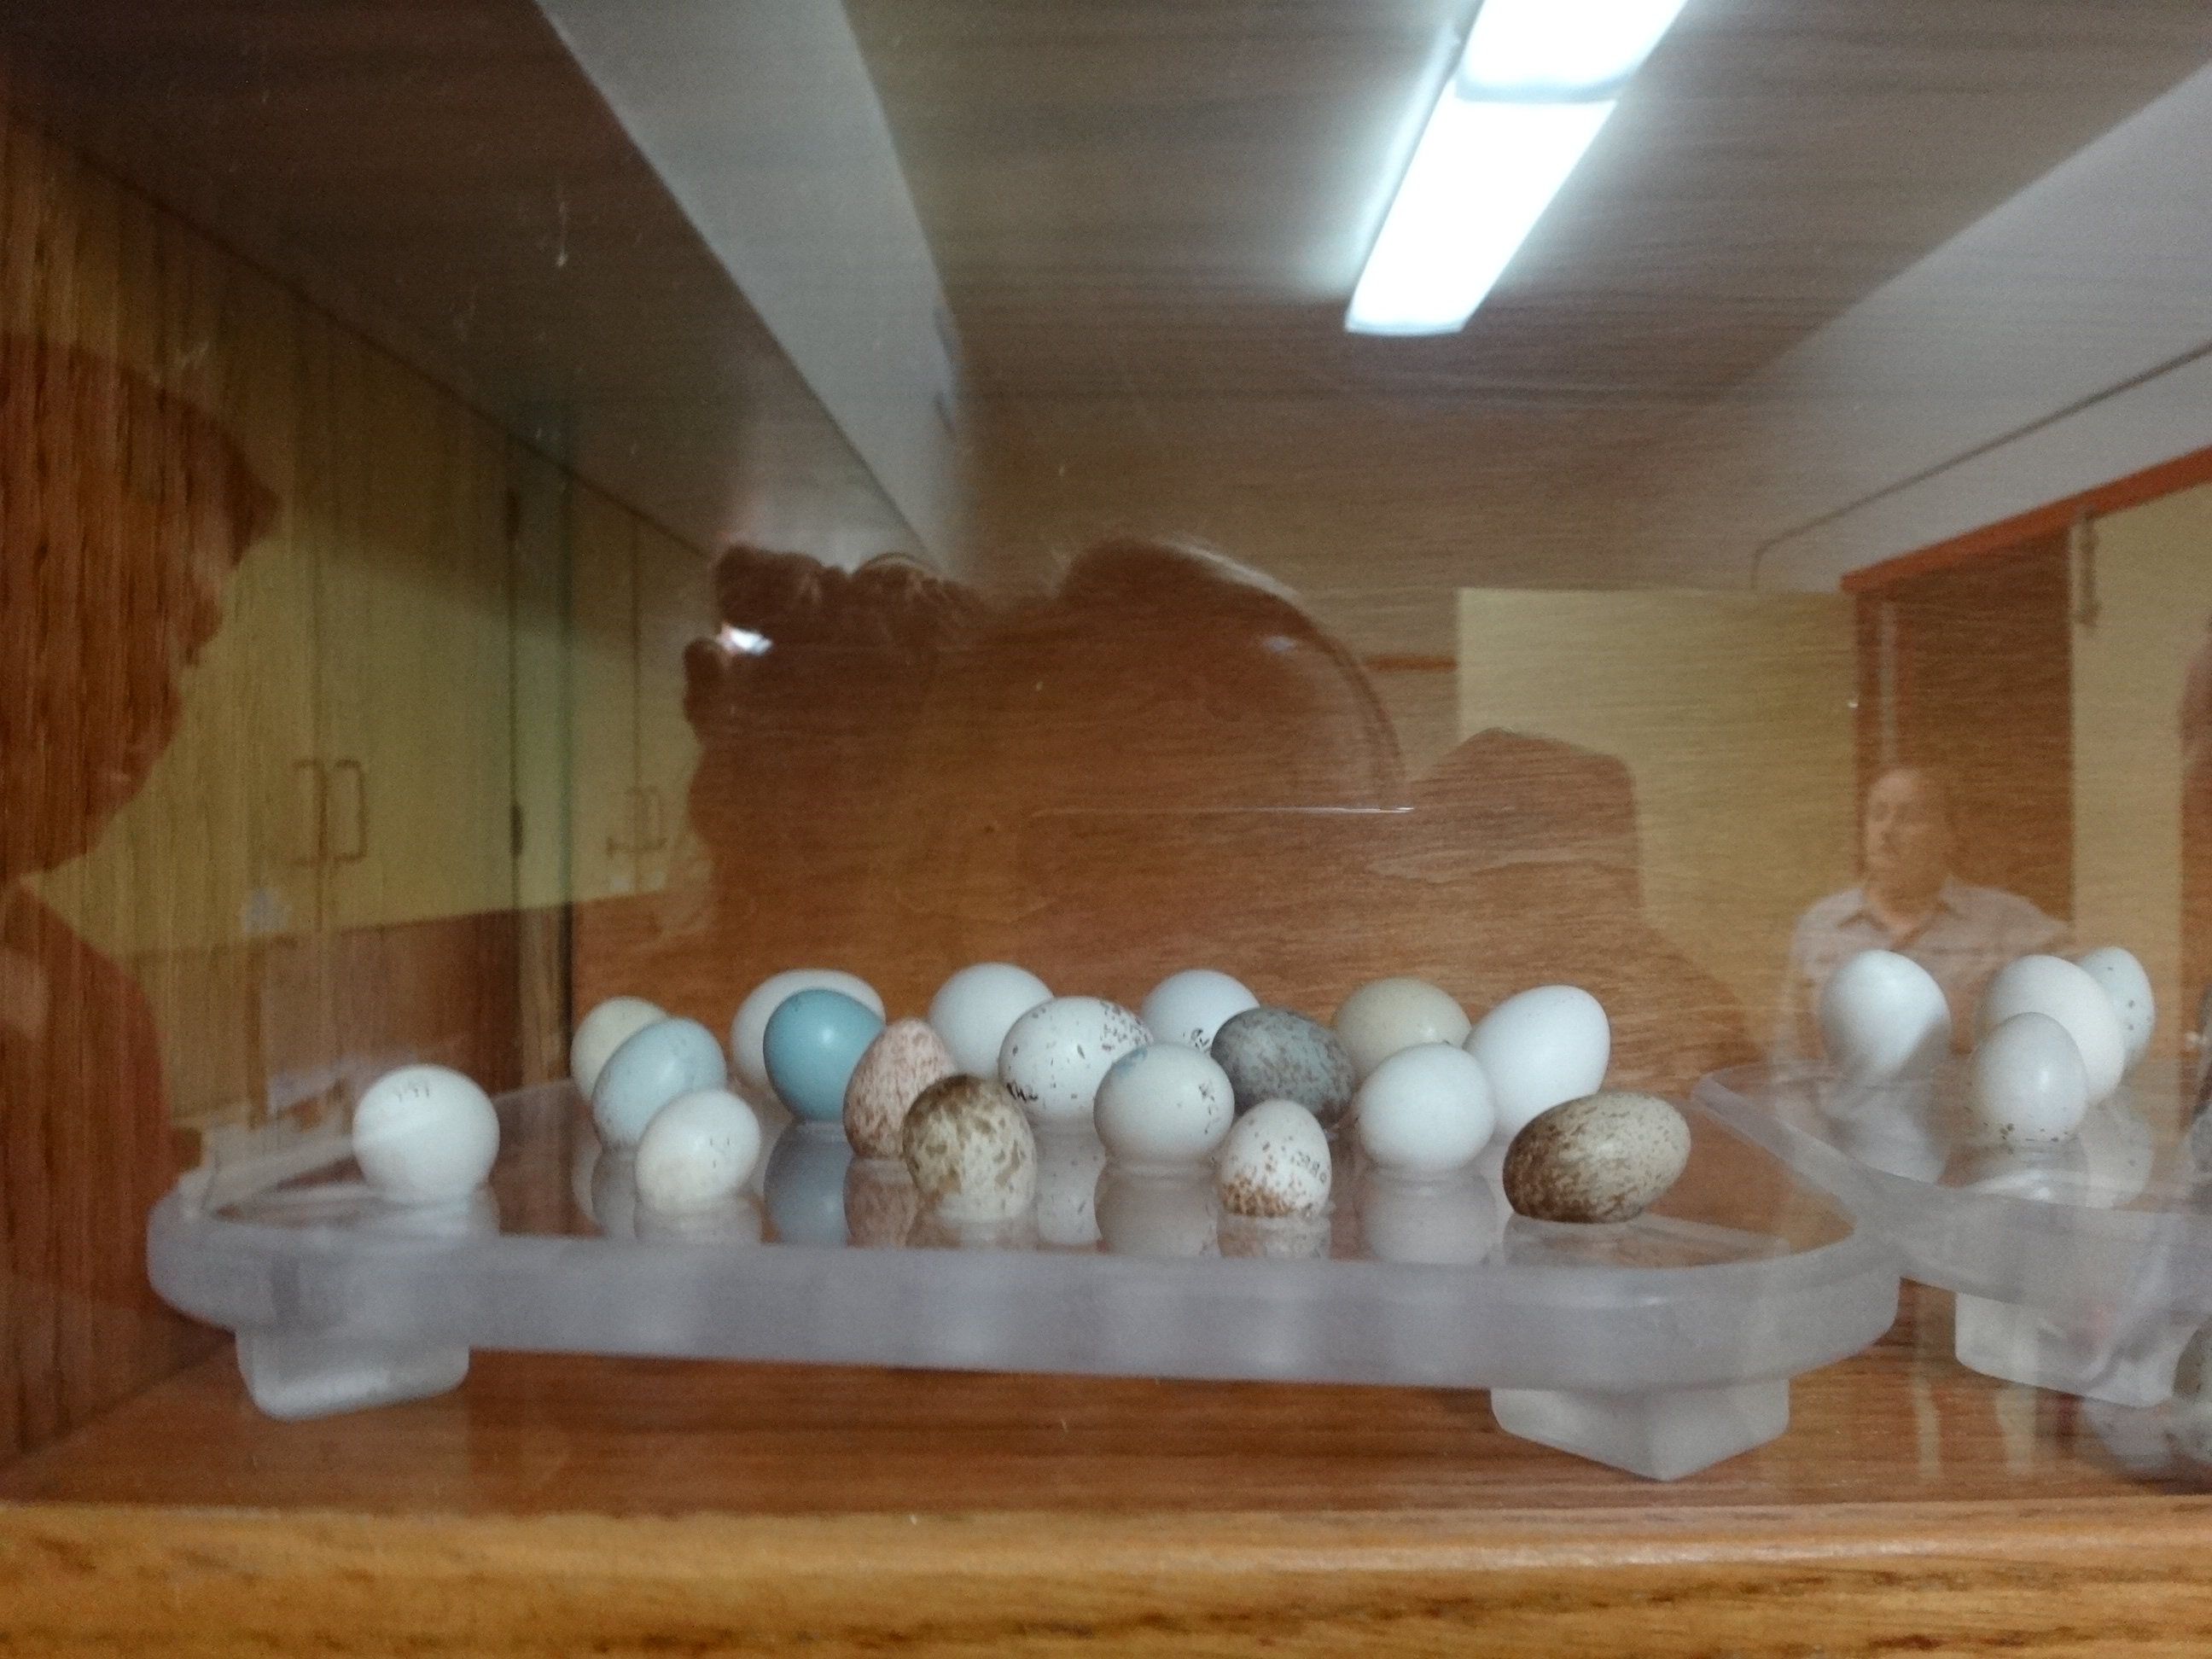 Photo 1: Interns first visited the incubation room! Ms. Theule and Ms. Knutson explained that every bird has a unique egg type, with each type of egg requiring very specific care during the incubation process. The over a dozen eggs shown here are only a small sample of the variety of coloring and sizes that bird eggs can have!